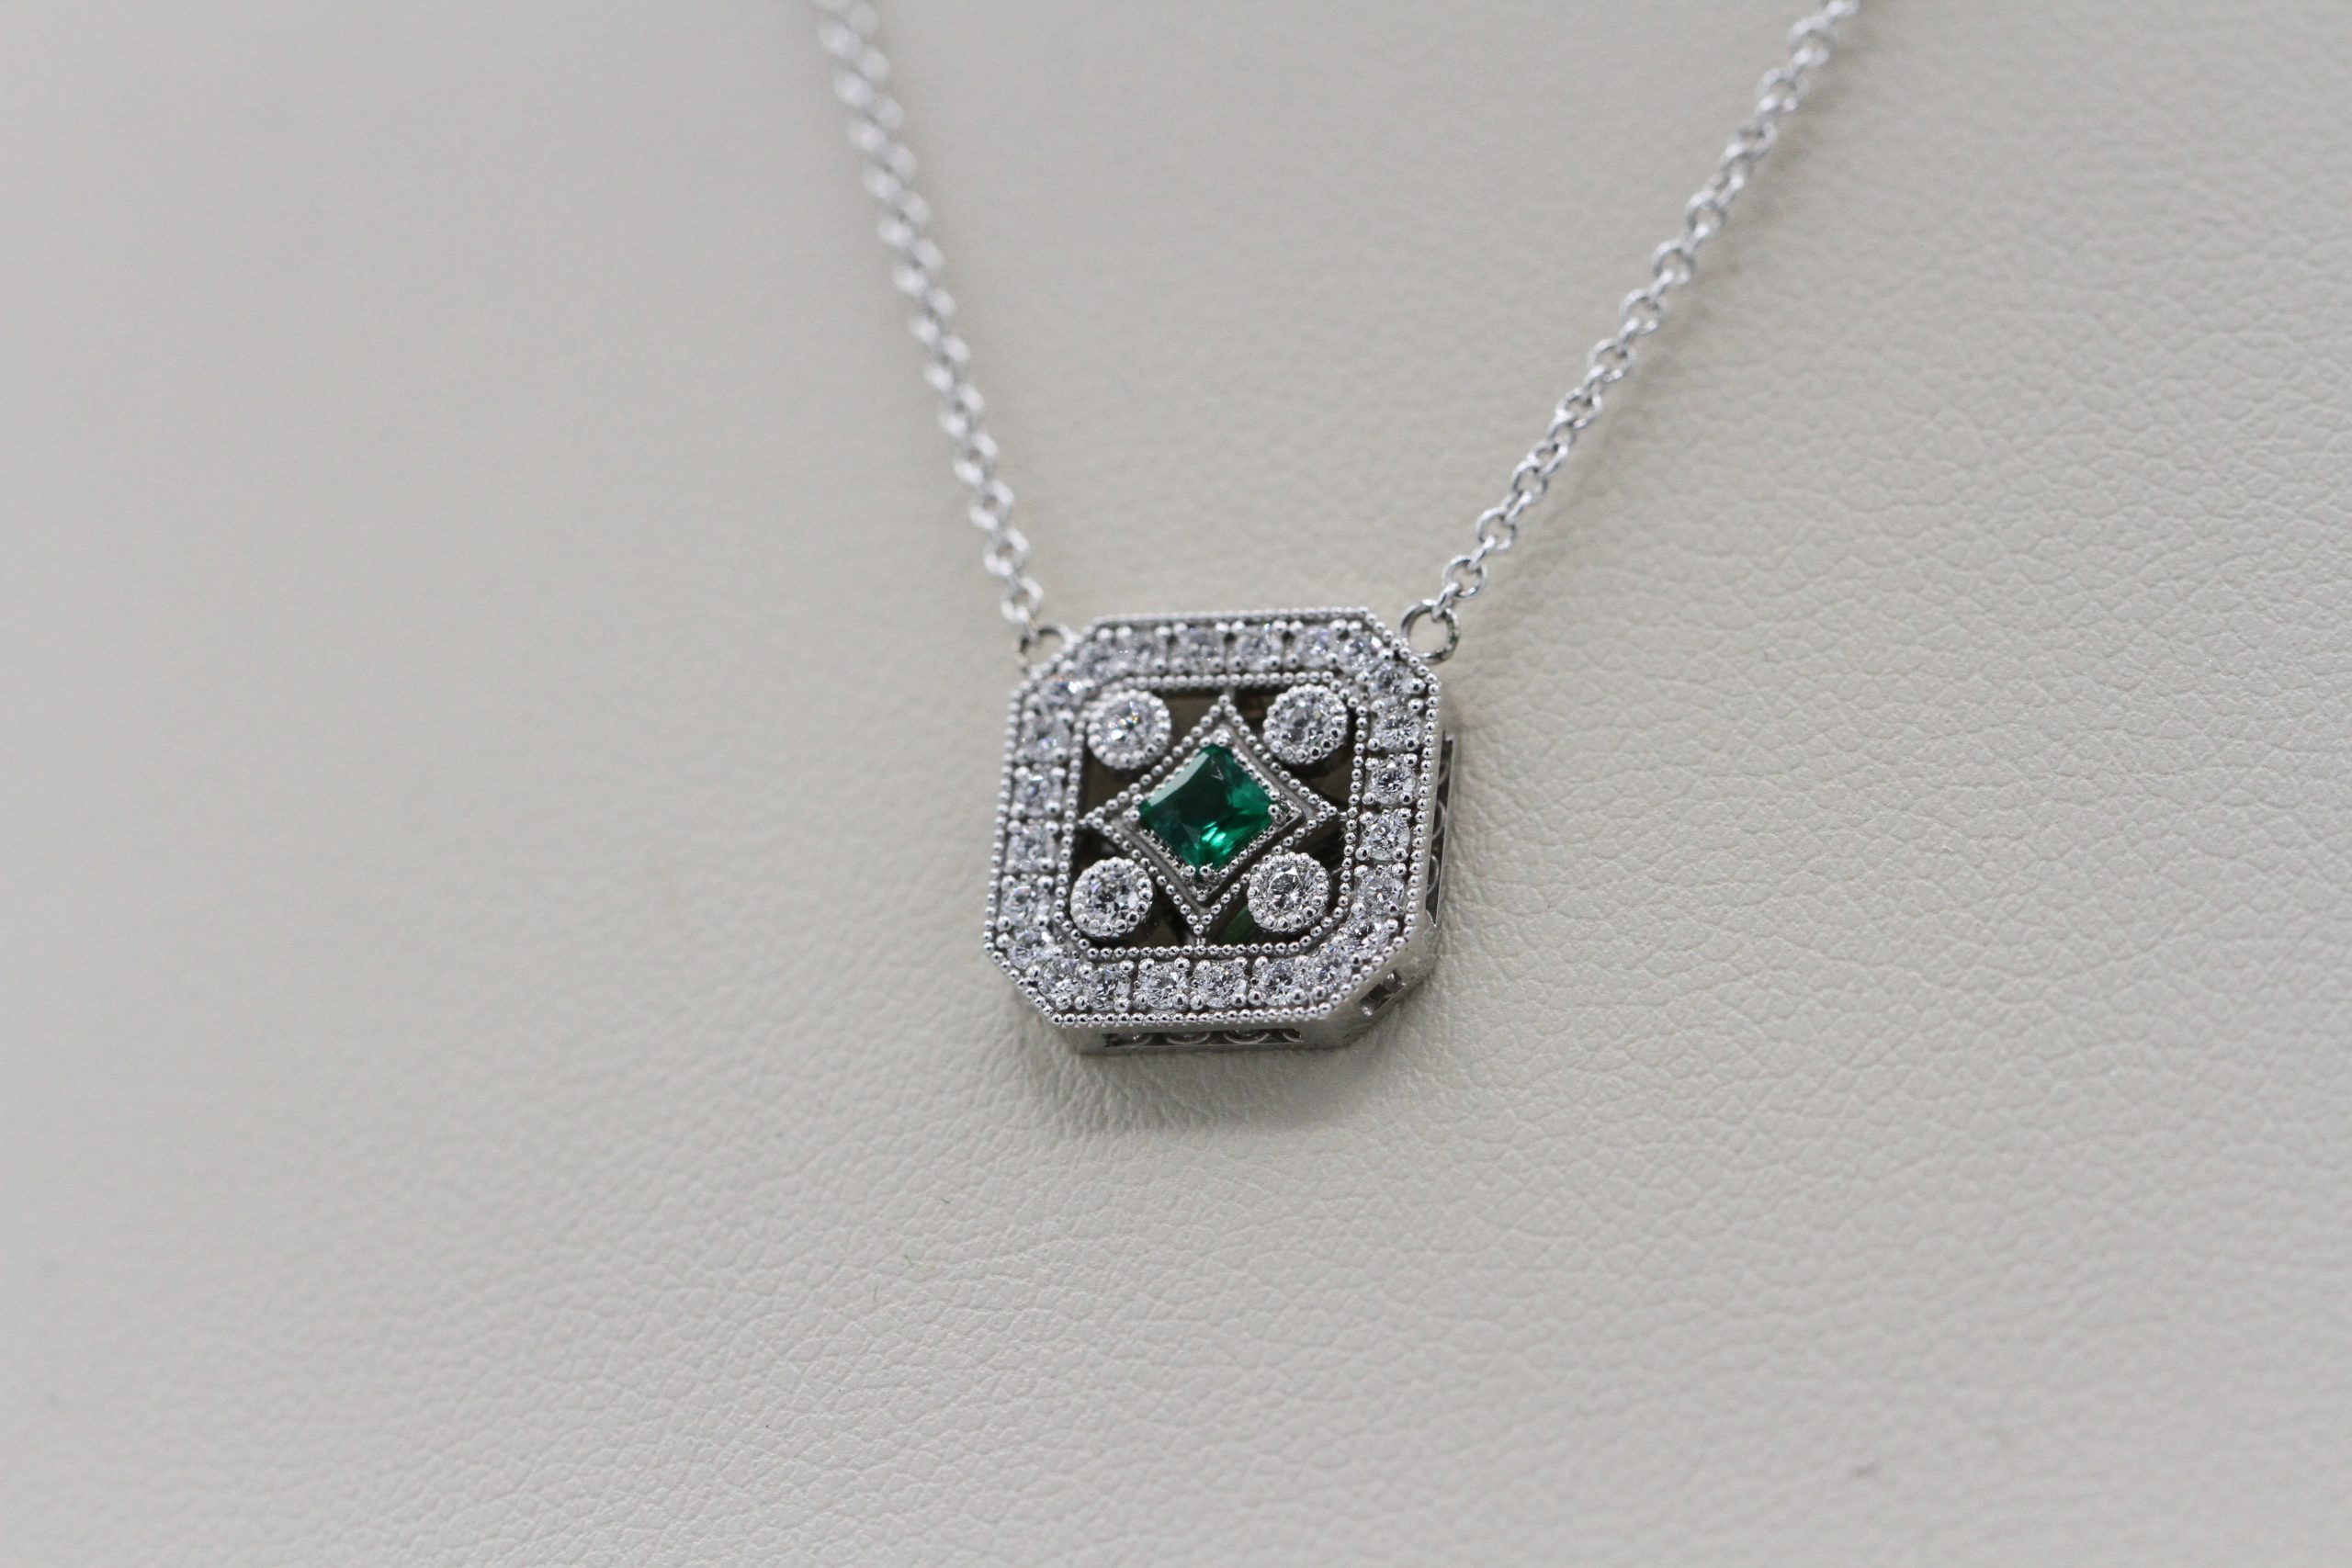 A silver necklace with an emerald centerpiece